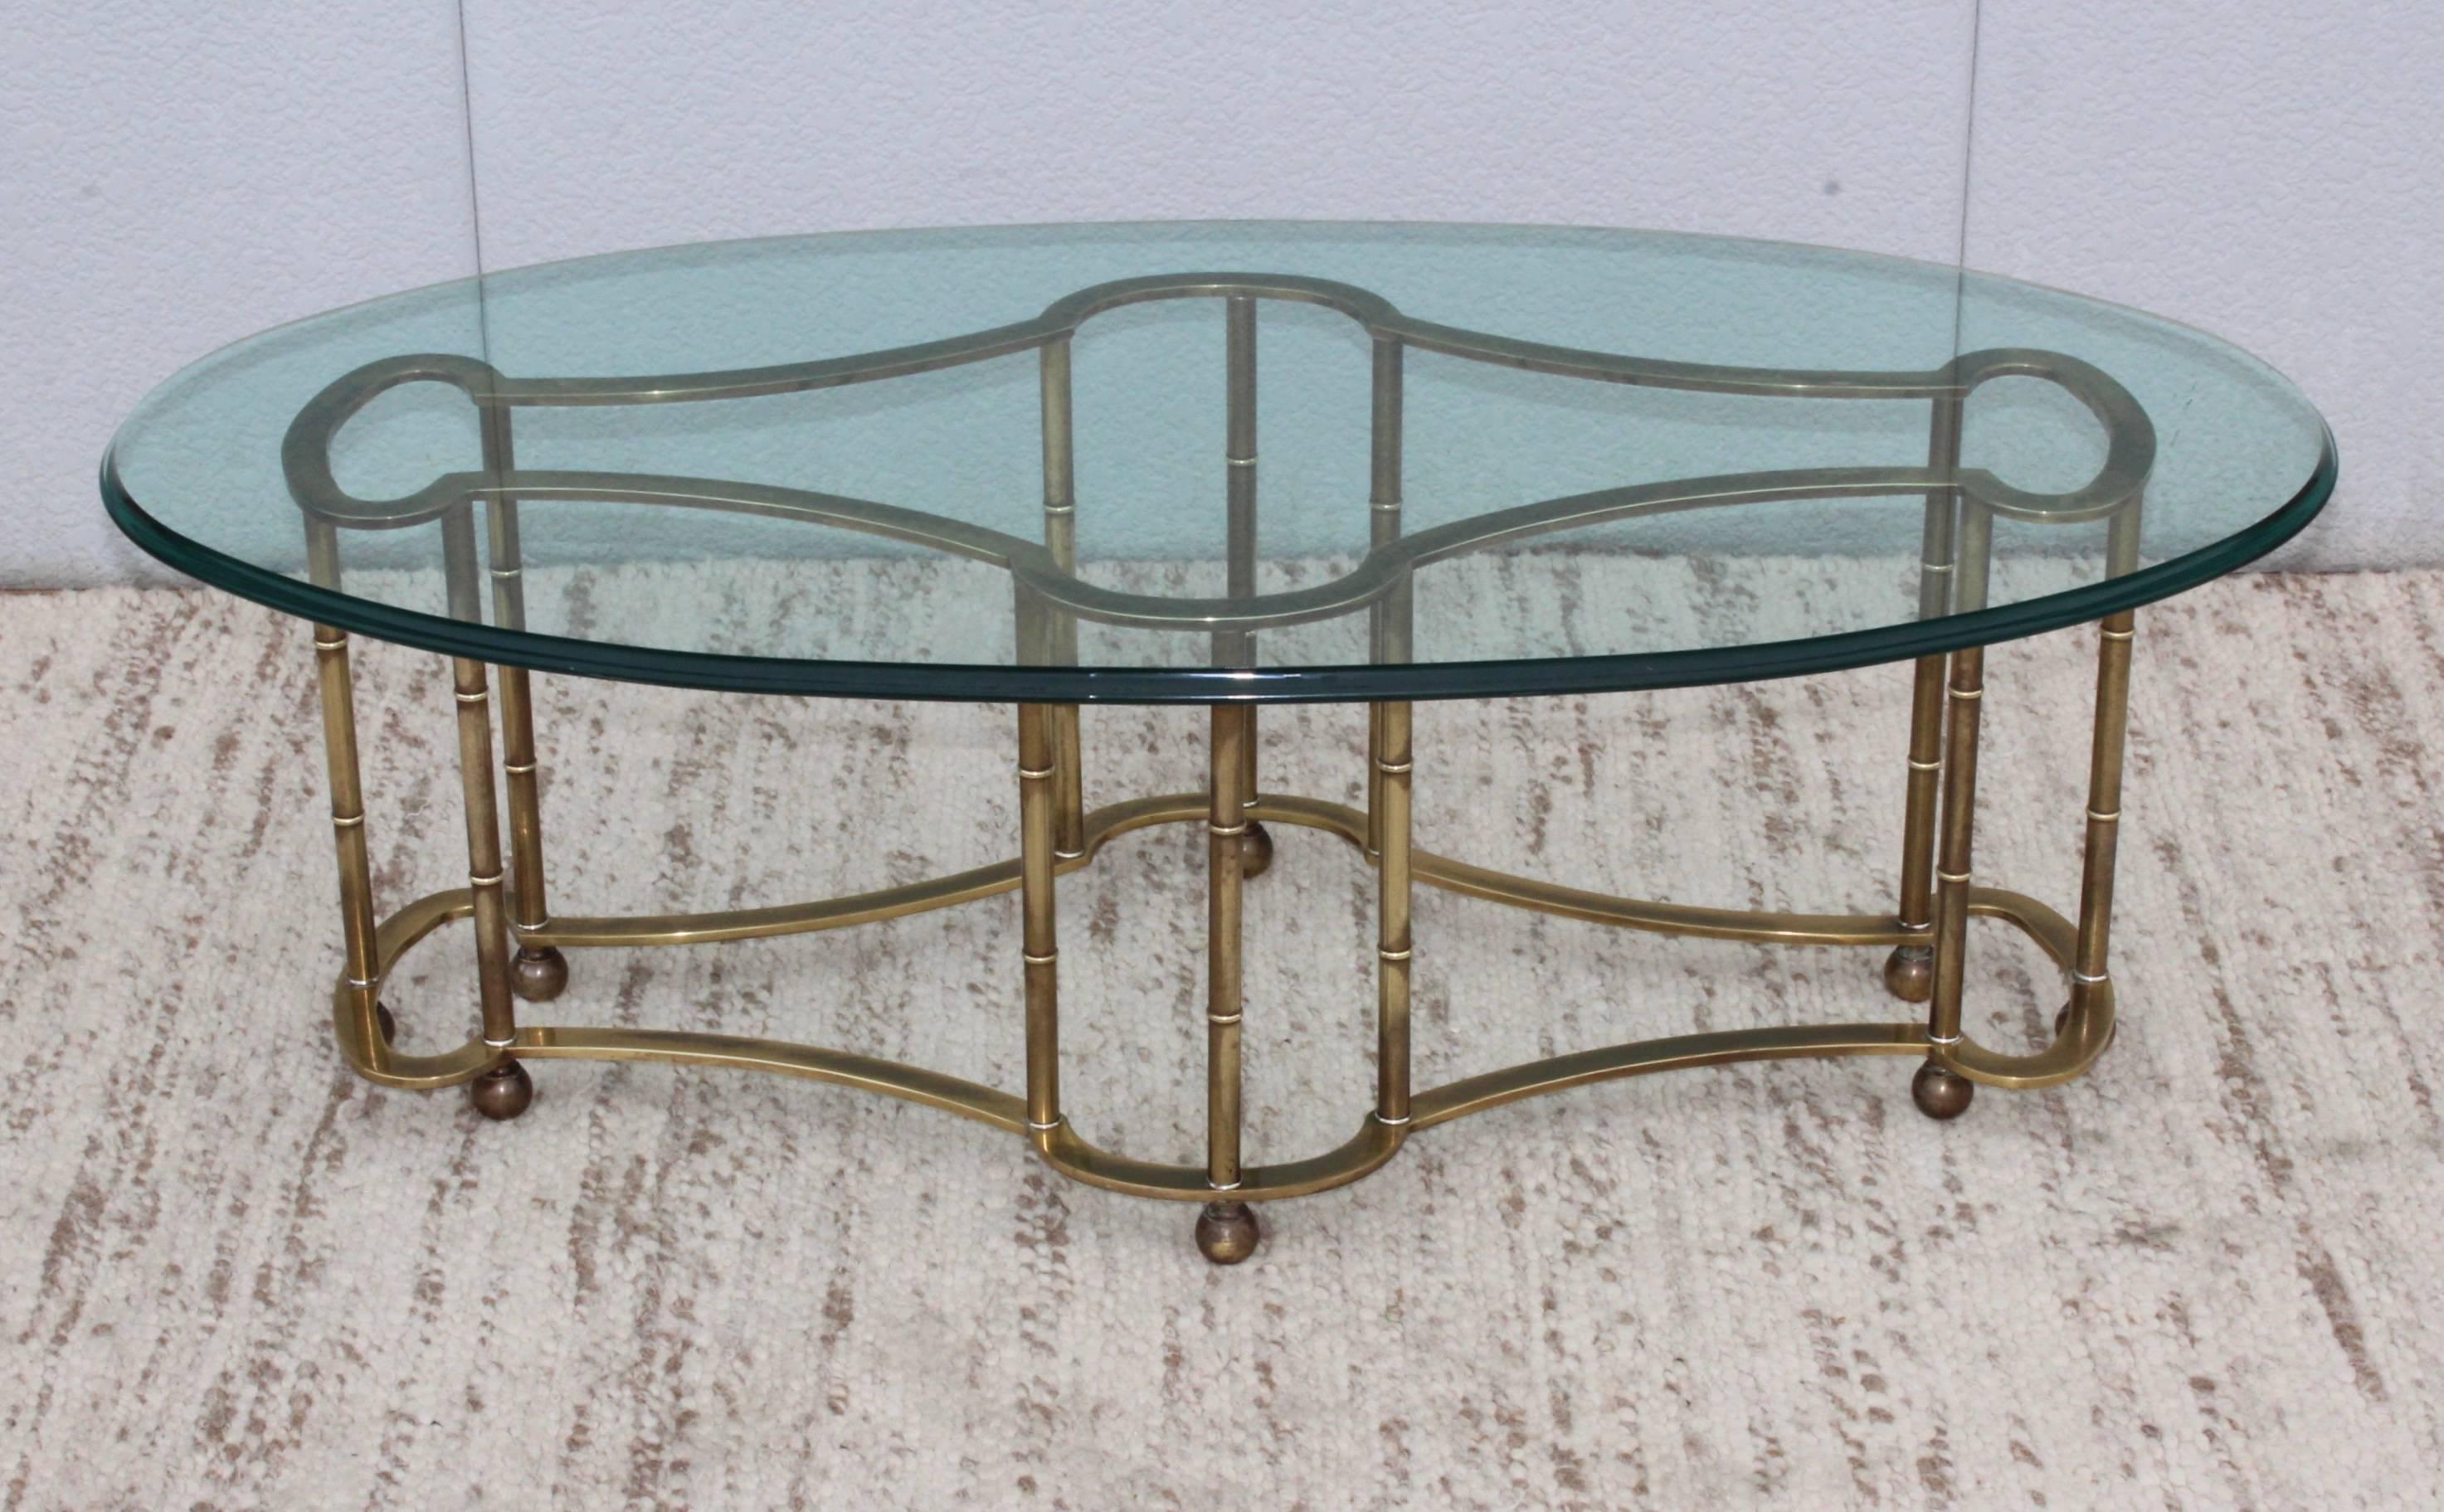 1970s modern Mastercraft racetrack brass coffee table with oval bevelled glass top.